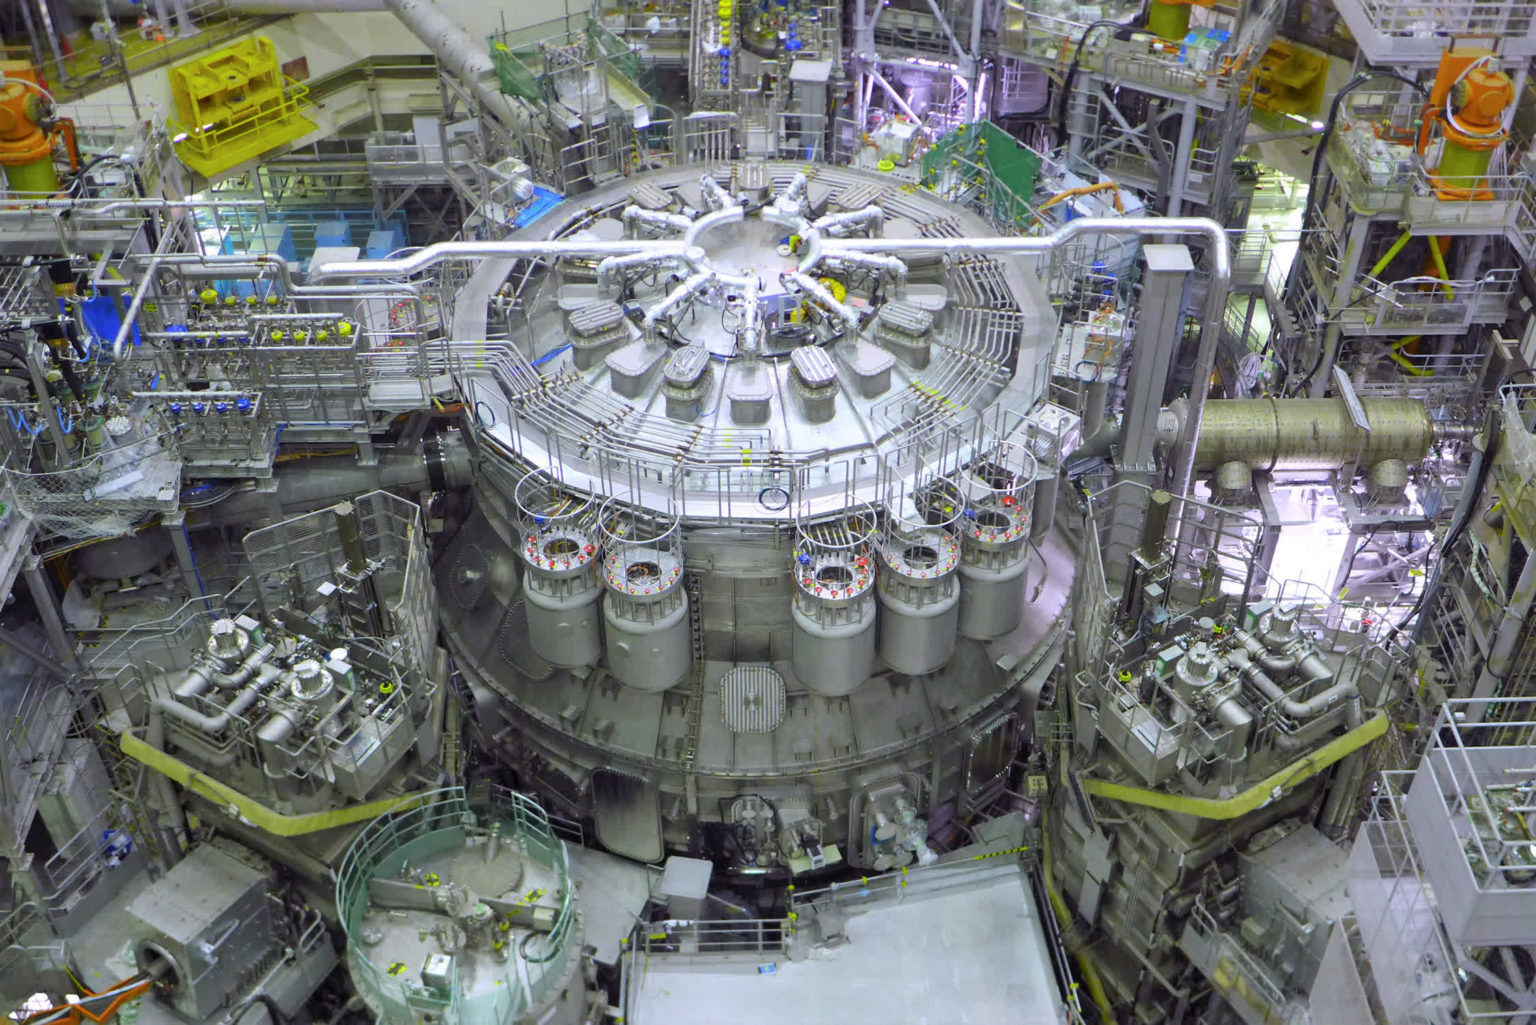 In nuclear fusion milestone, Japan unveils the world